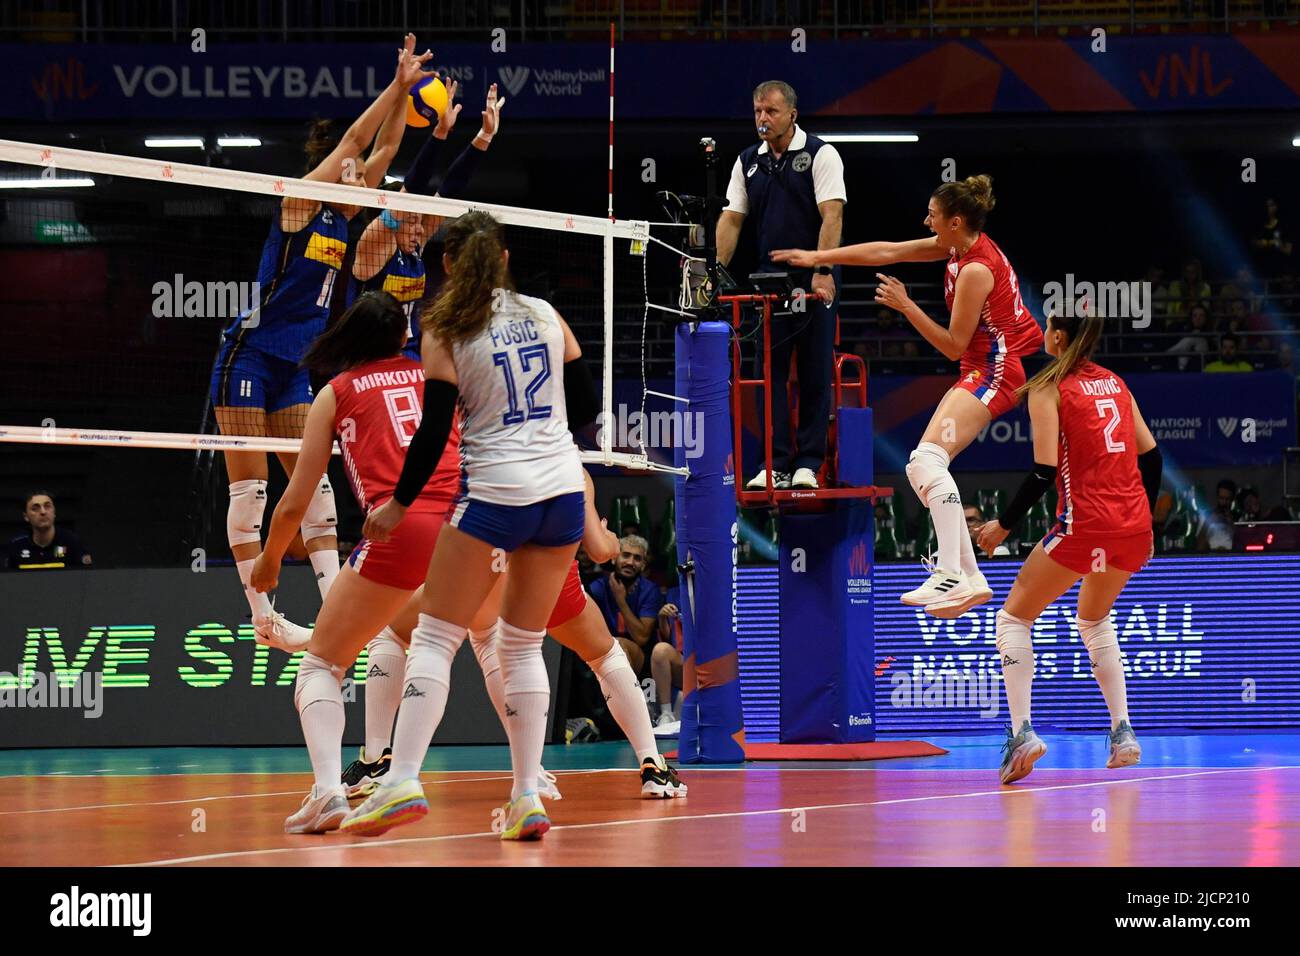 volleyball world cup live streaming